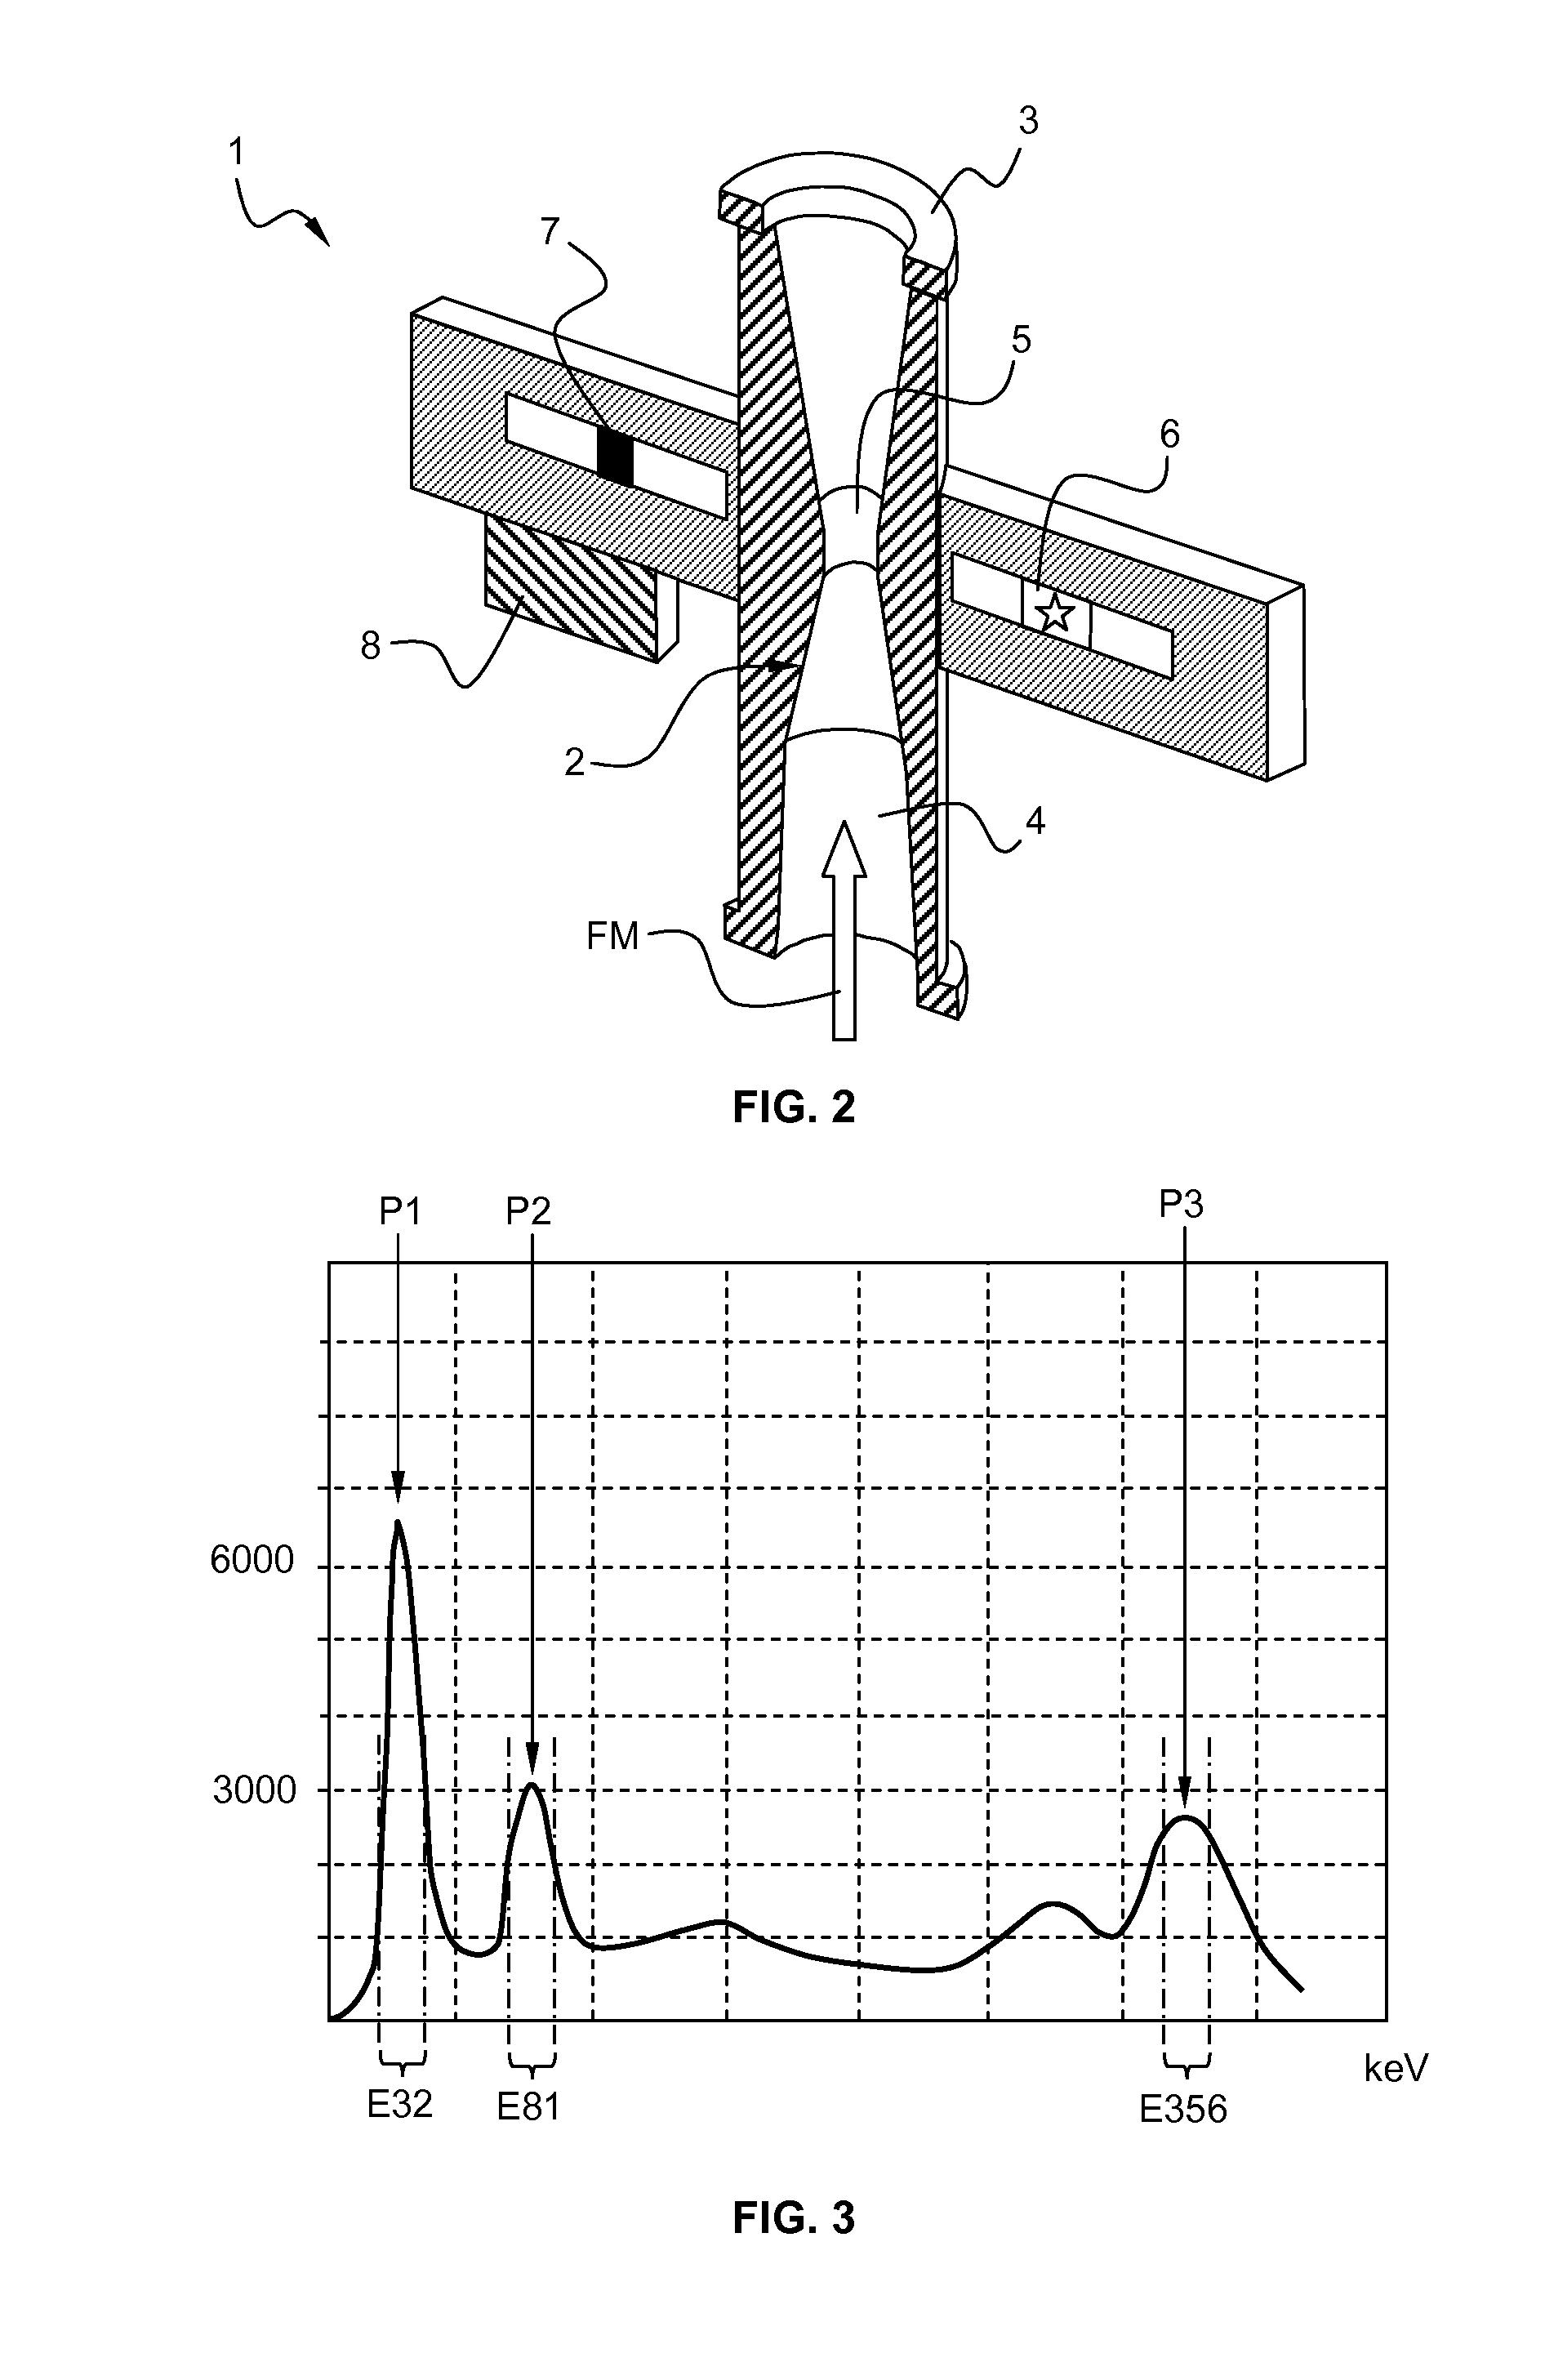 Apparatus and method for determining a characteristic ratio and a parameter affecting the characterisitic ratio of a multiphase fluid mixture